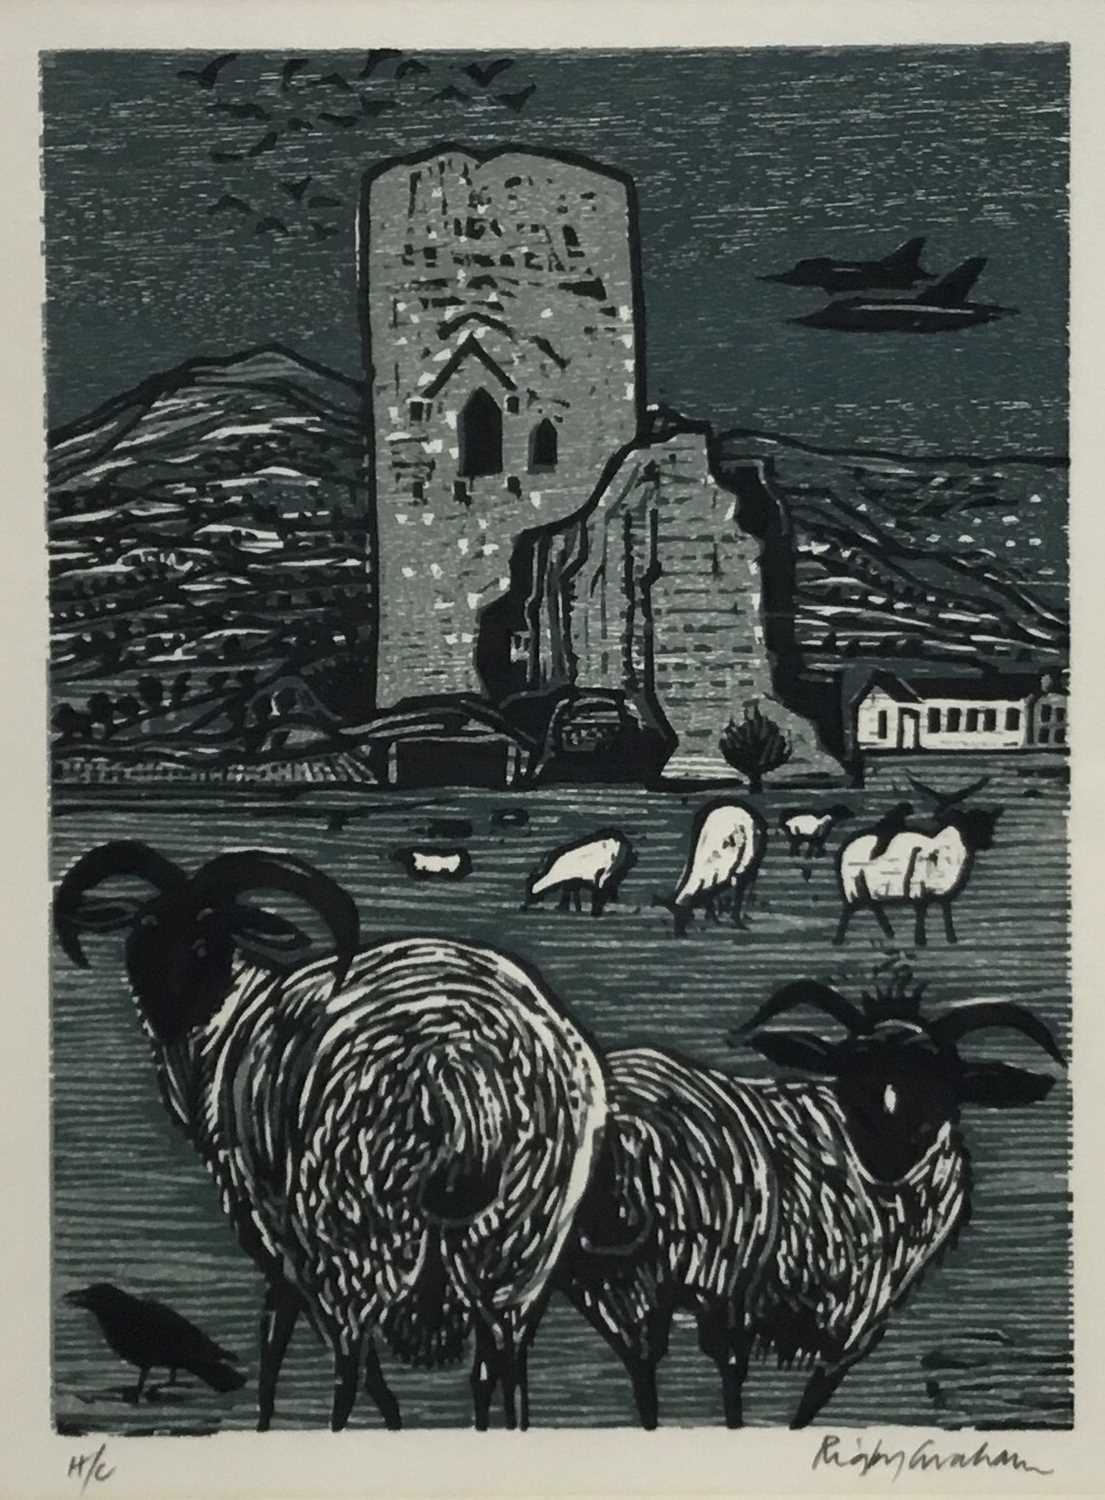 Lot 133 - Rigby Graham (1931-2015) colour linocut, sheep before a tower, signed and numbered h/c, 29 x 22cm, glazed frame